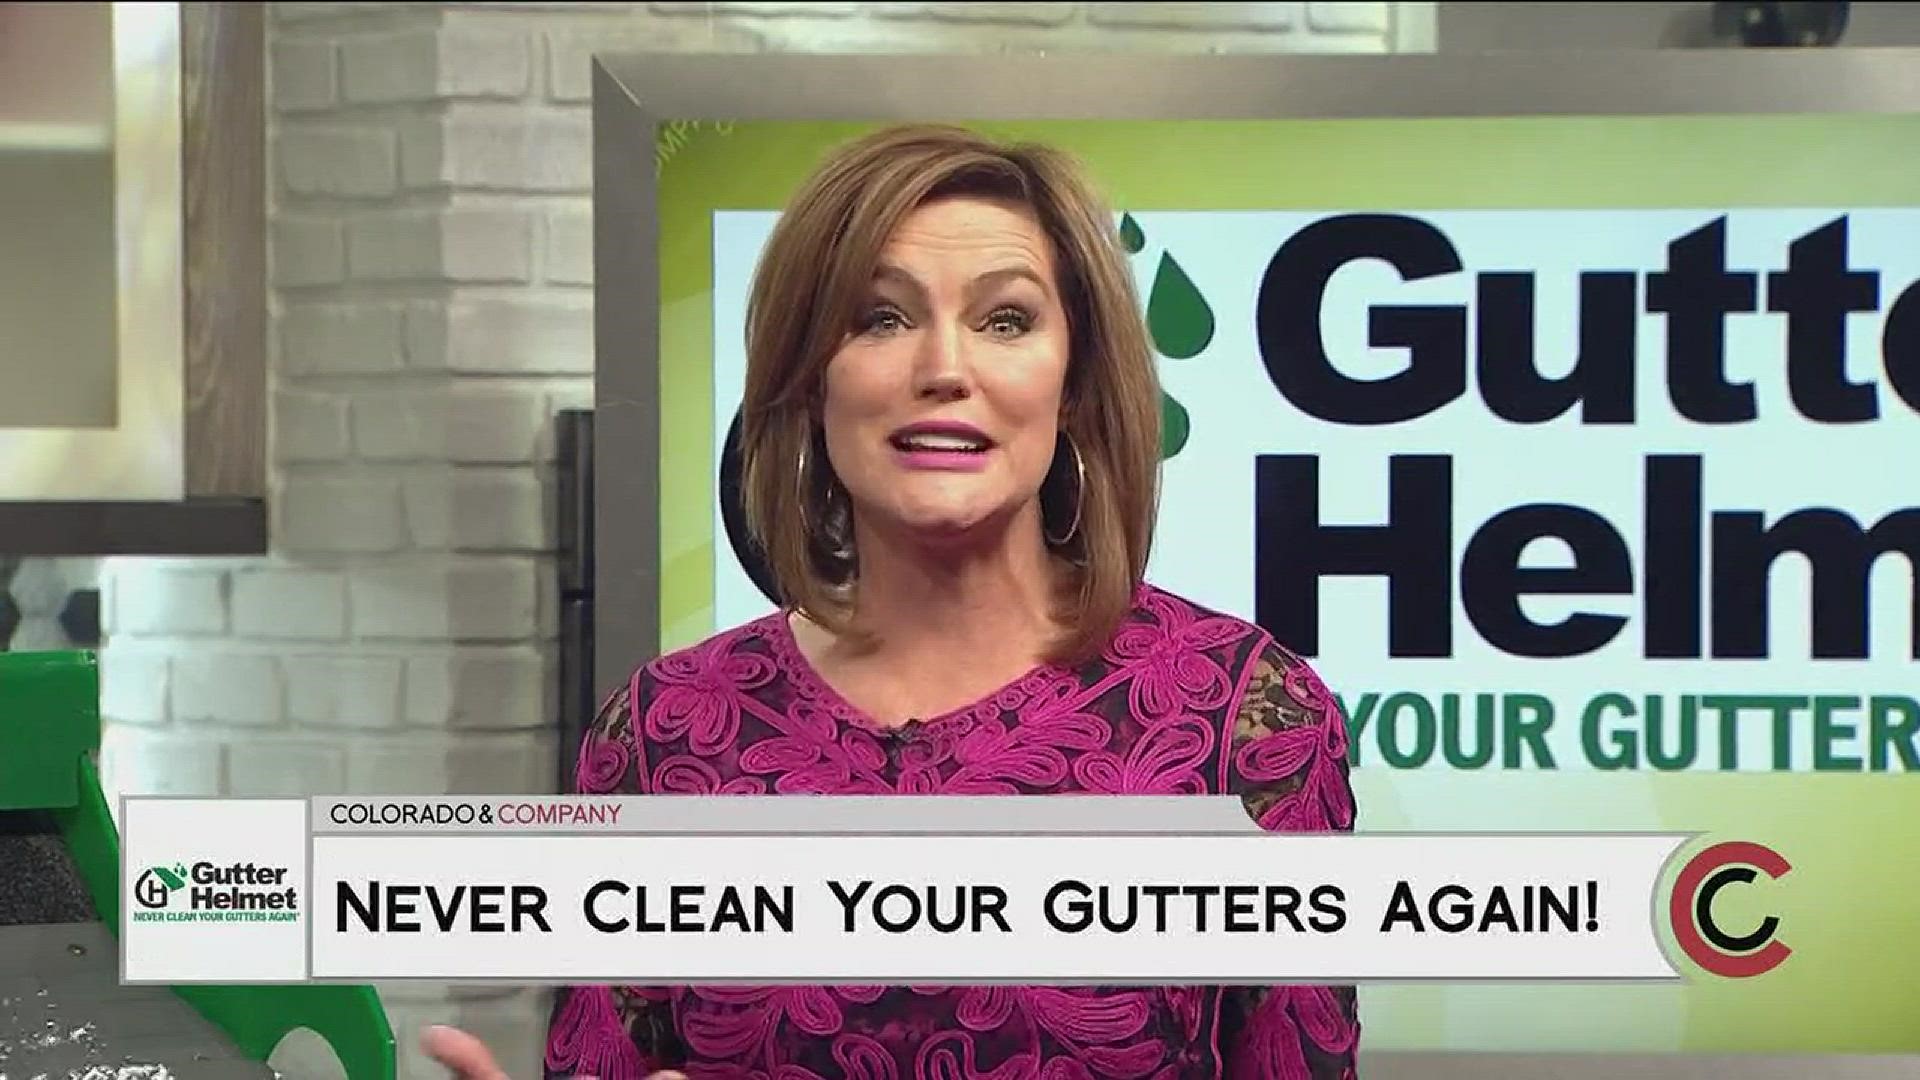 Never clean your gutters again. Gutter Helmet has the biggest discount since 2012! Call 303.298.8888 to see how much you could save. Discounts include, senior, military and a buyer’s bonus. Learn more online at www.GutterHelmetDenver.com. 
THIS INTERVIEW HAS COMMERCIAL CONTENT. PRODUCTS AND SERVICES FEATURED APPEAR AS PAID ADVERTISING.